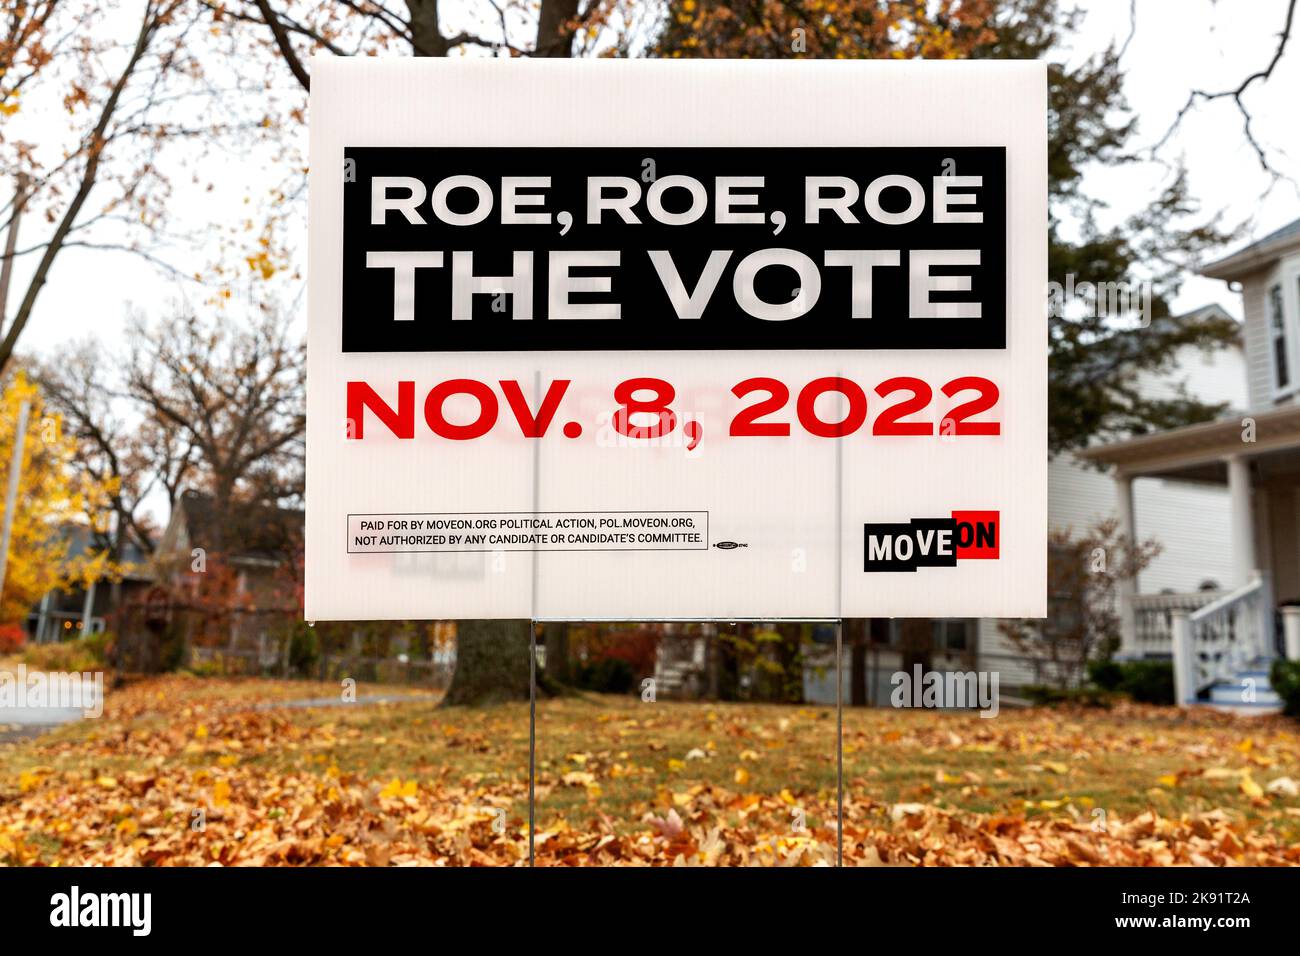 2022 midterm election sign regarding reproductive rights and a parody of song lyrics regarding the overturning of Roe v. Wade by the by U.S. Supreme C Stock Photo